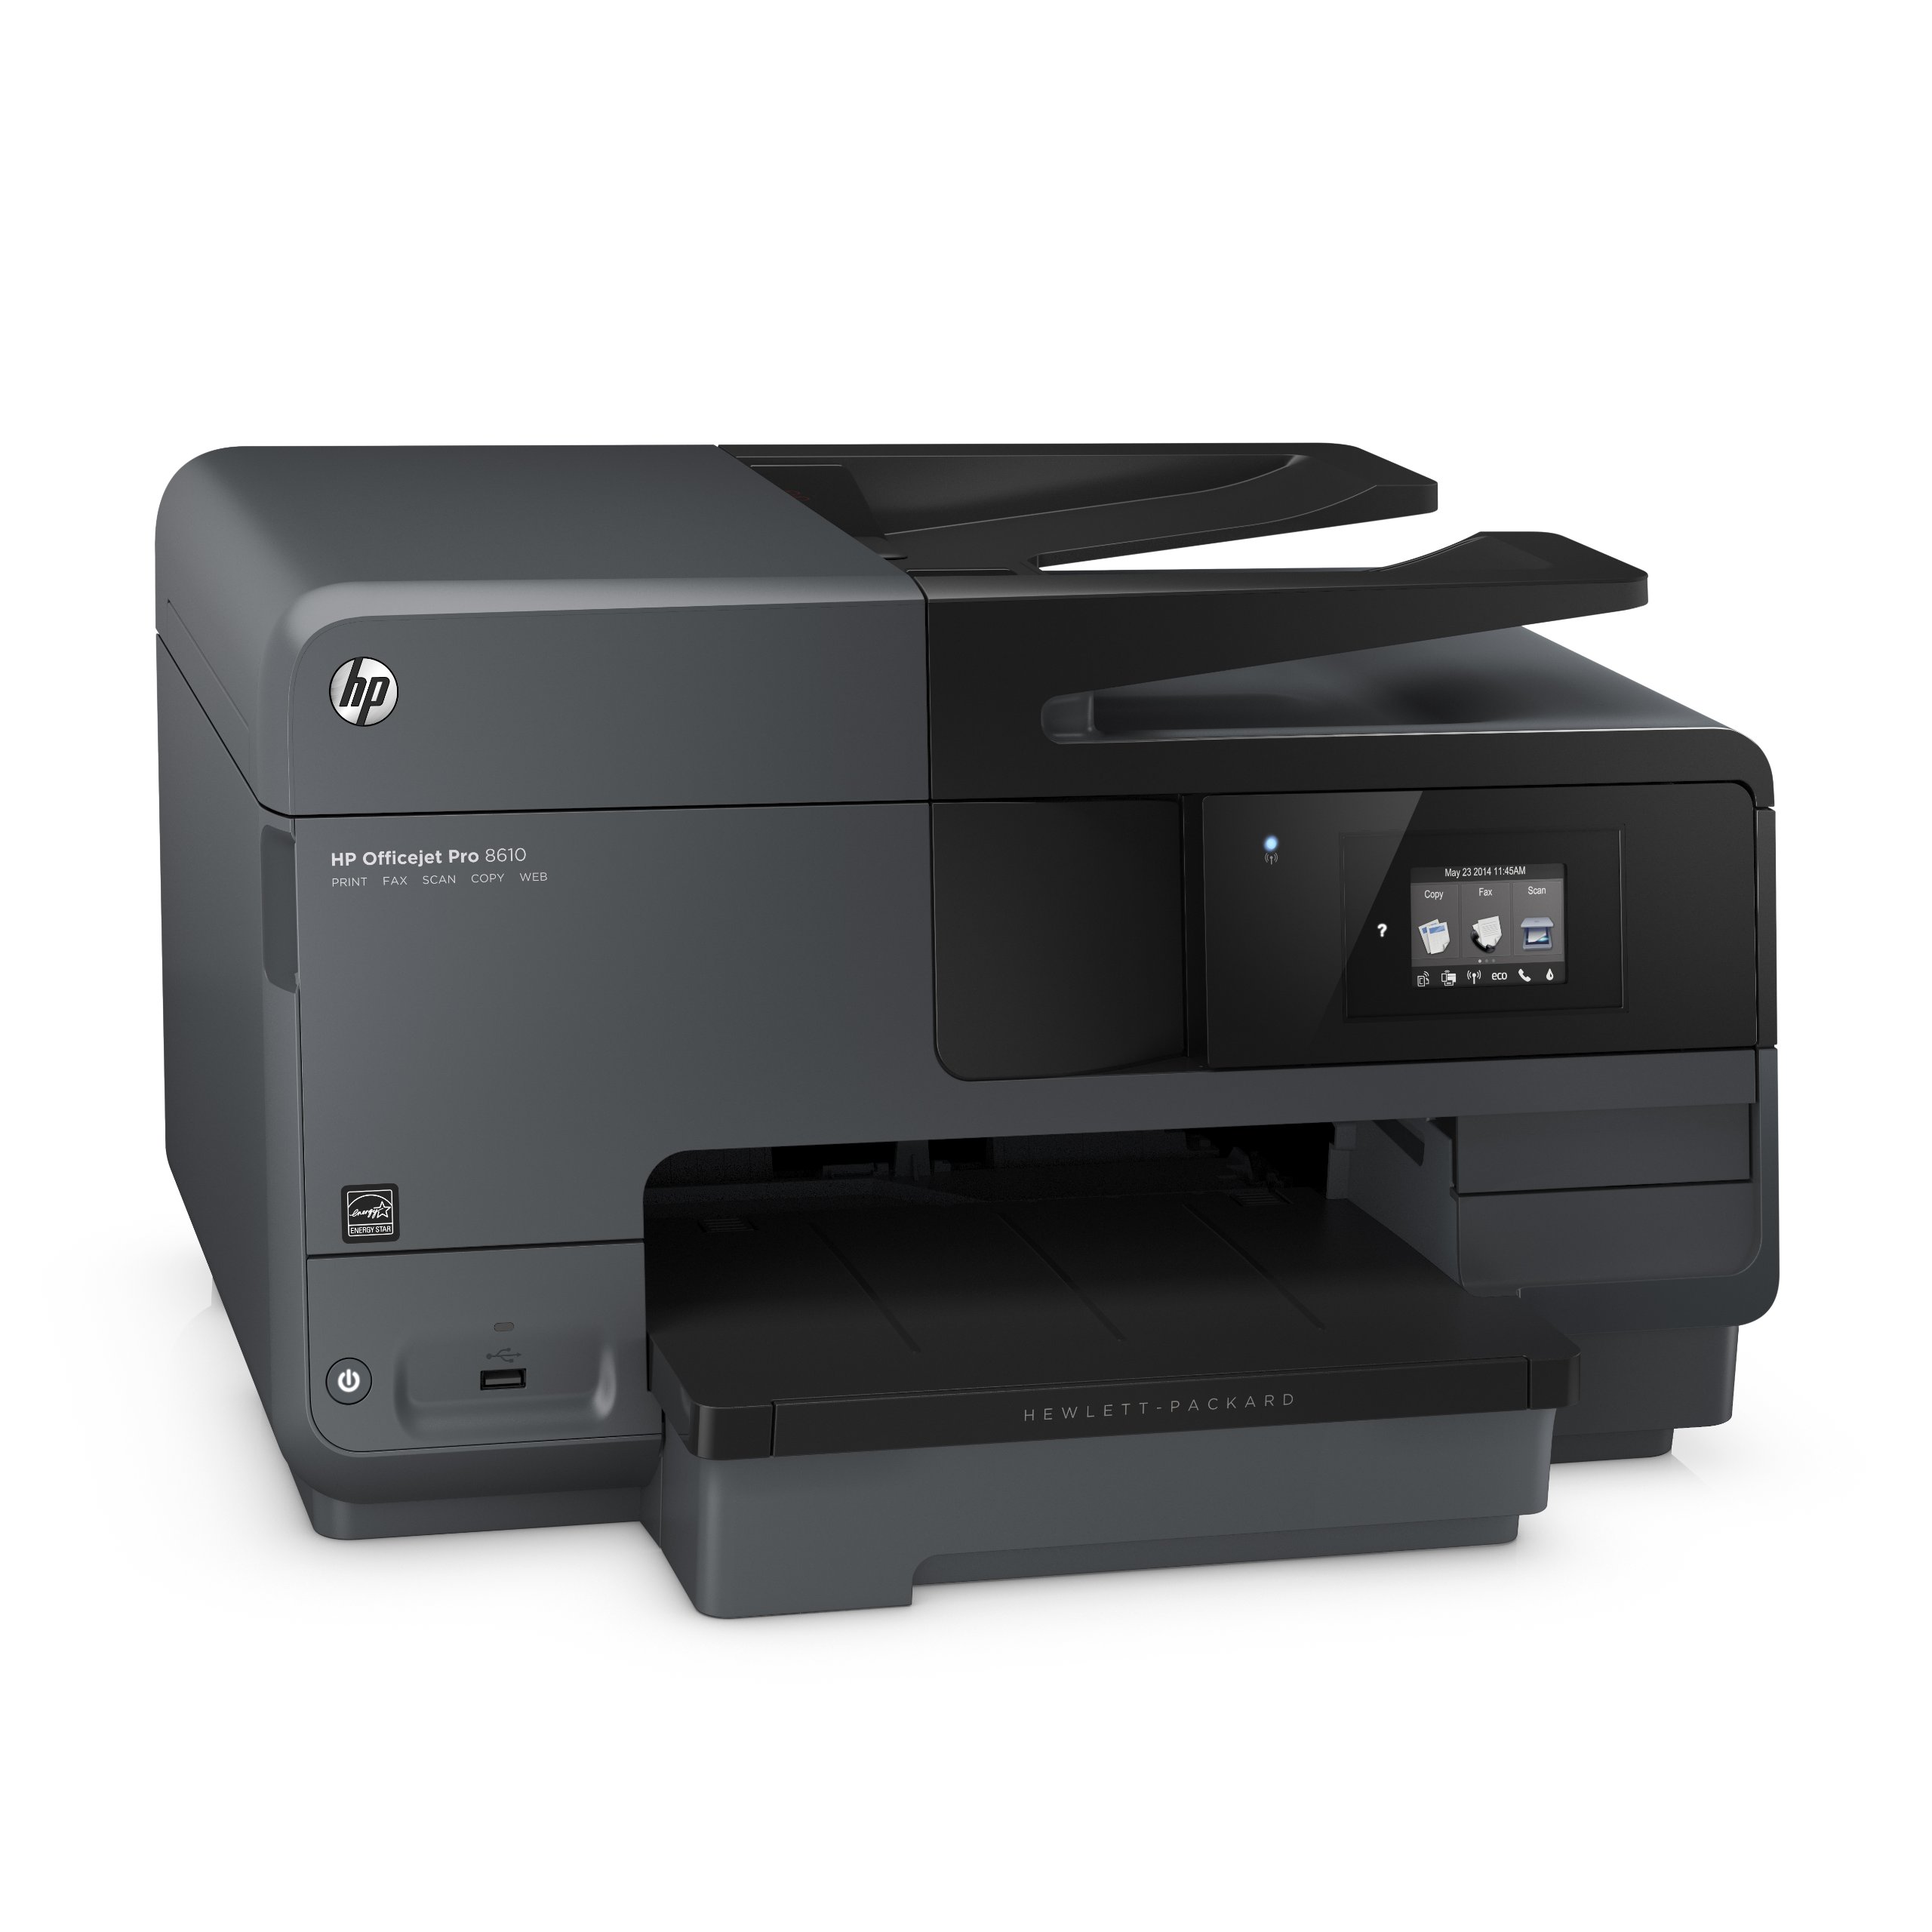 HP OfficeJet Pro 8610,Color All-in-One Wireless Printer with Mobile Printing, HP Instant Ink or Amazon Dash replenishment ready (A7F64A)